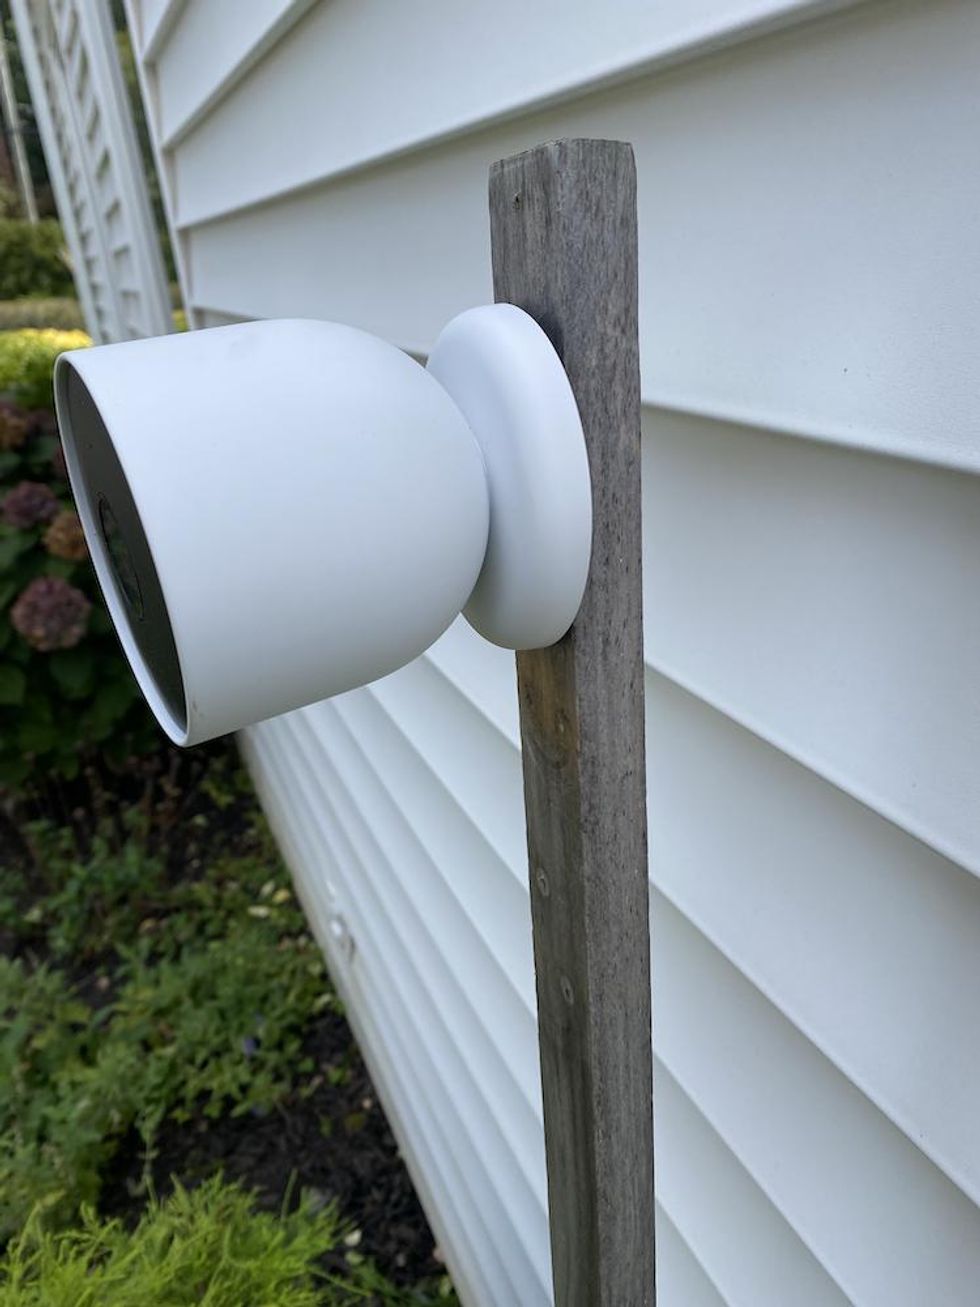 Google Nest Cam installed on the side of a house.